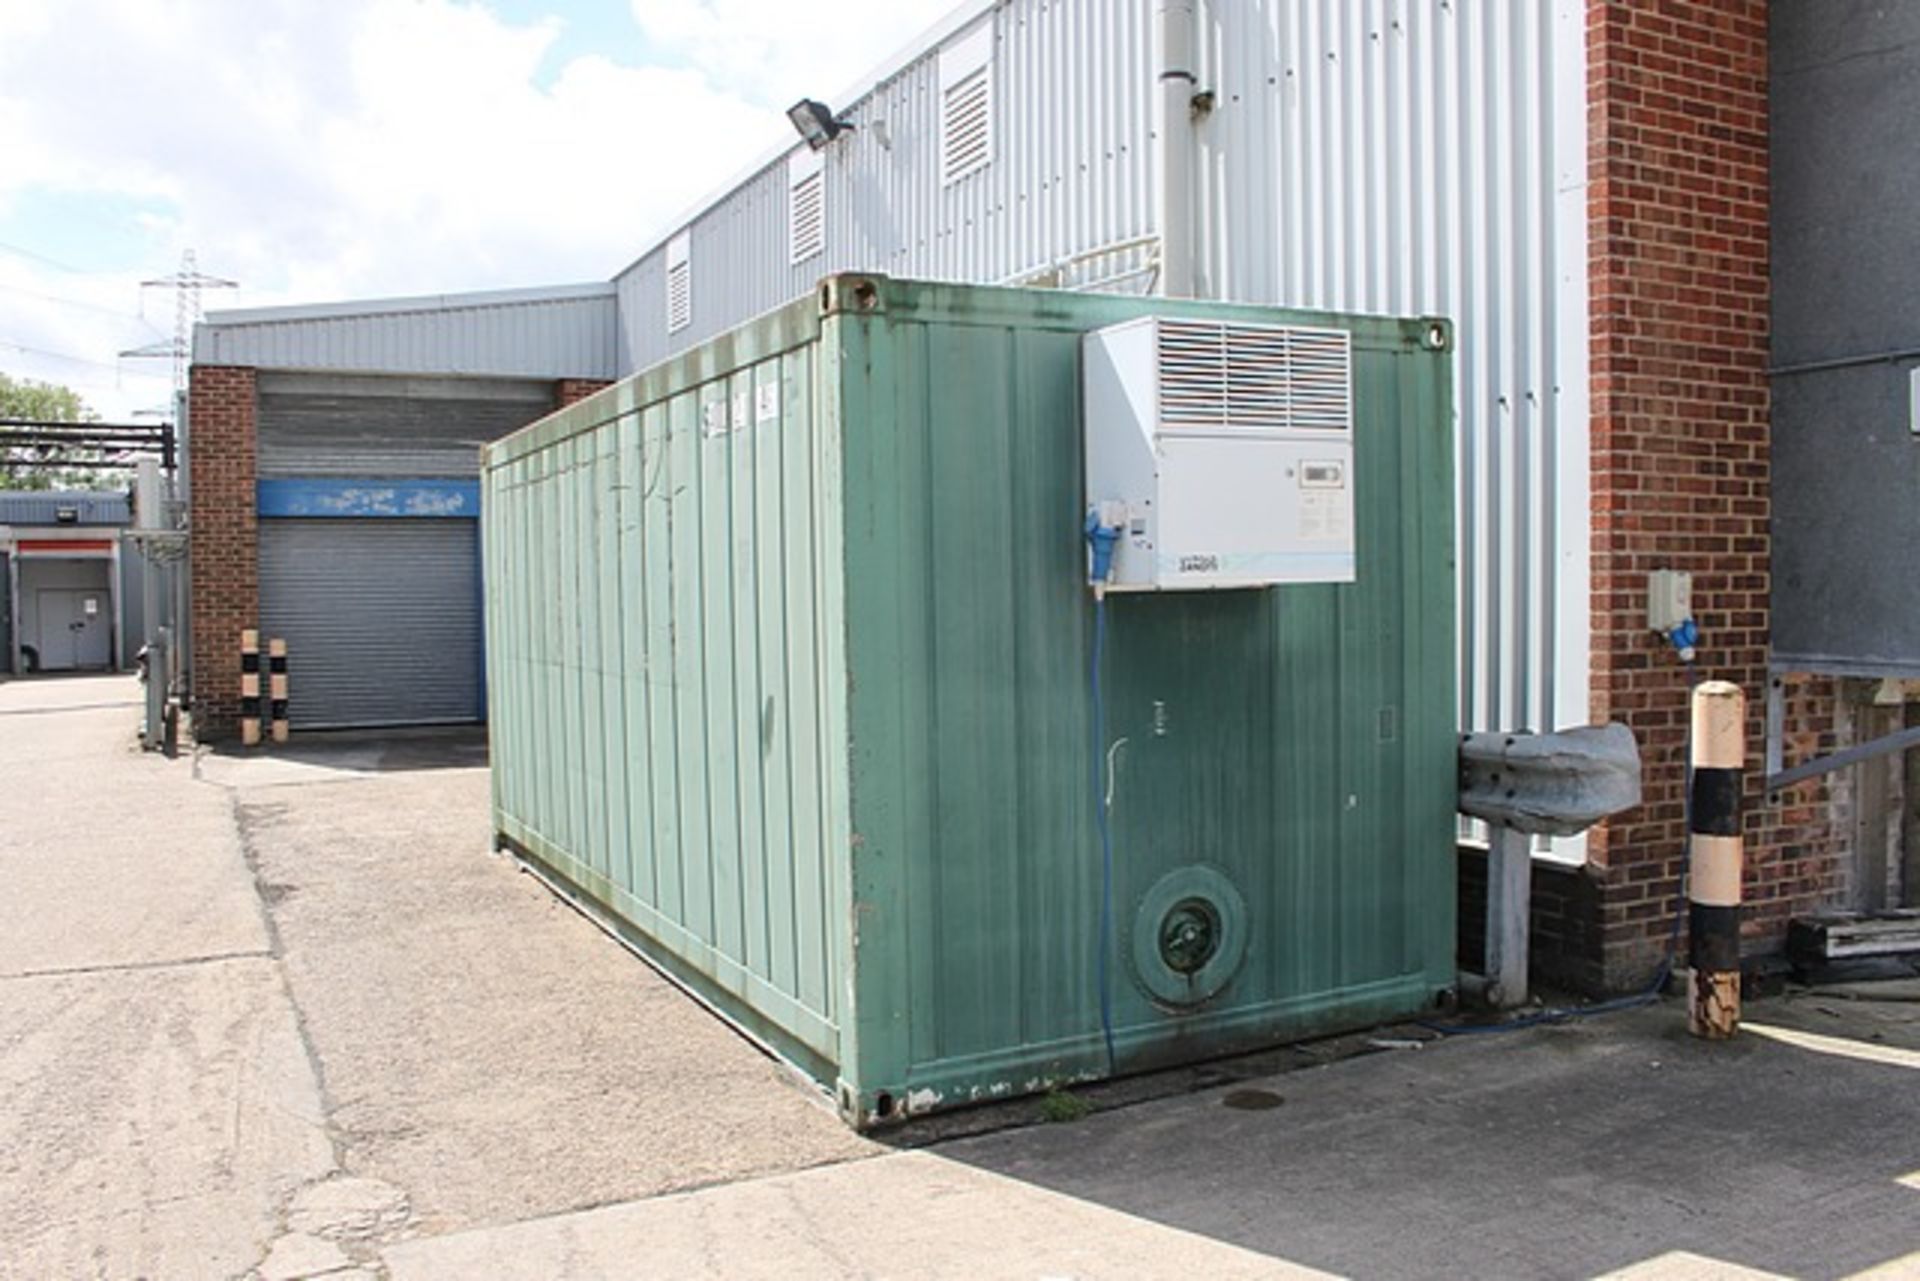 Portable Refrigeration Storage Container 20ft x 8ft container with interior cladding set up to - Image 2 of 3